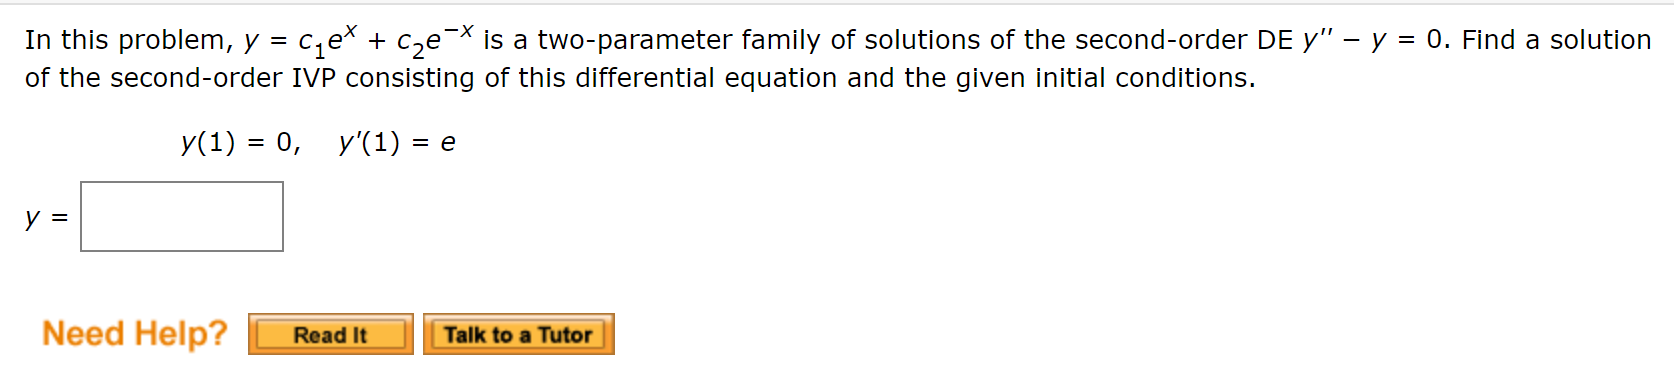 In this problem, y = c,ex + c,e¯* is a two-parameter family of solutions of the second-order DE y" – y = 0. Find a solution
of the second-order IVP consisting of this differential equation and the given initial conditions.
y(1) = 0, y'(1) = e
%3D
Need Help?
Talk to a Tutor
Read It
